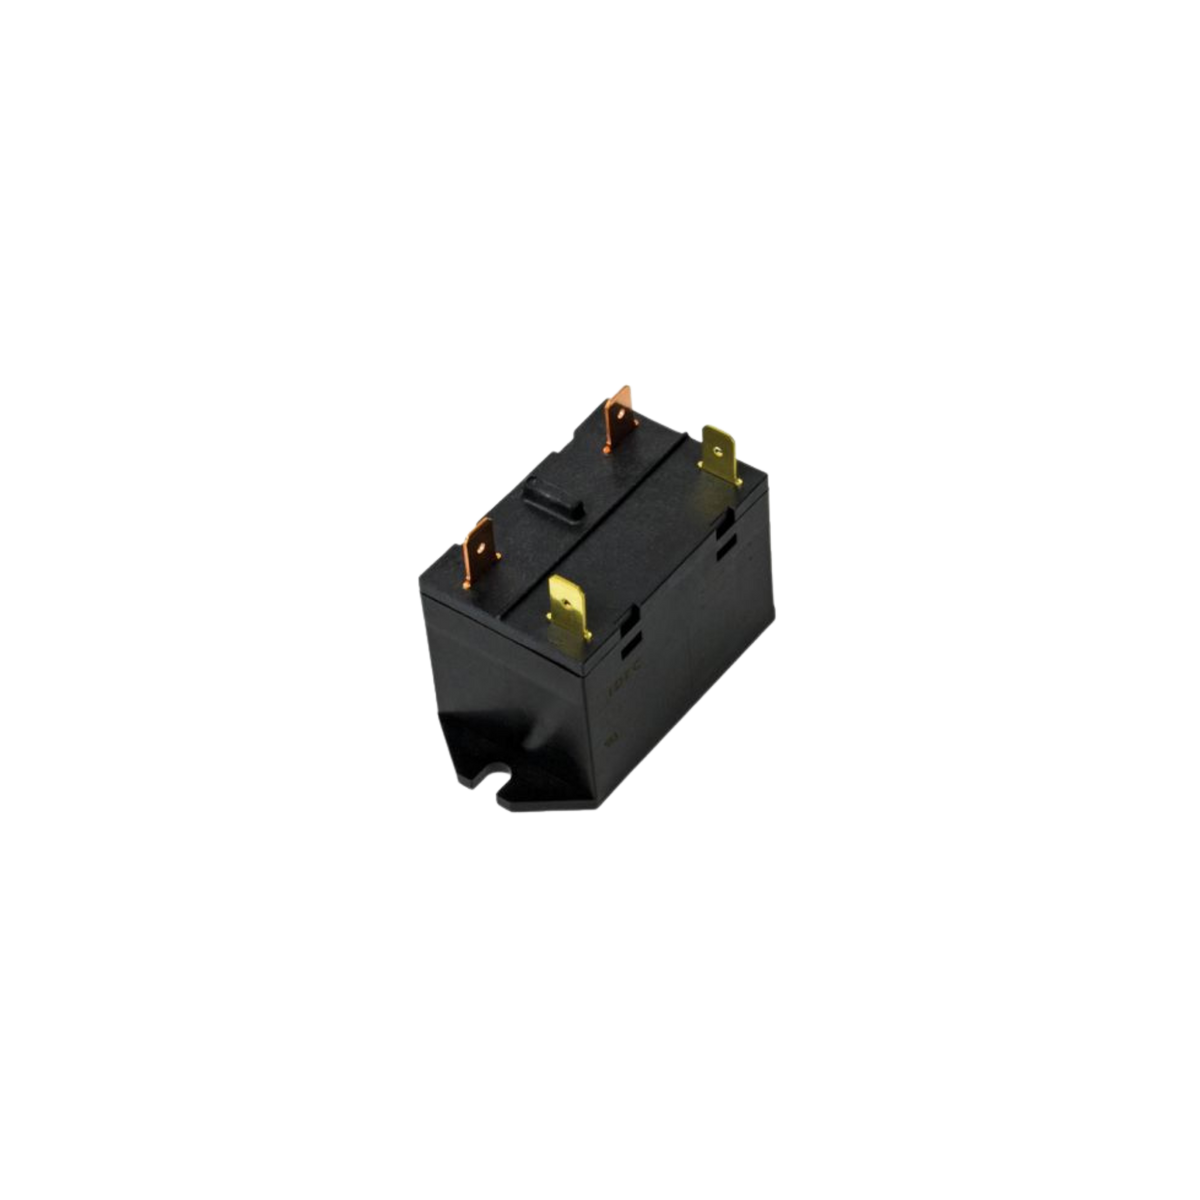 black plastic rectangular relay flange unit with four gold tabs at the top